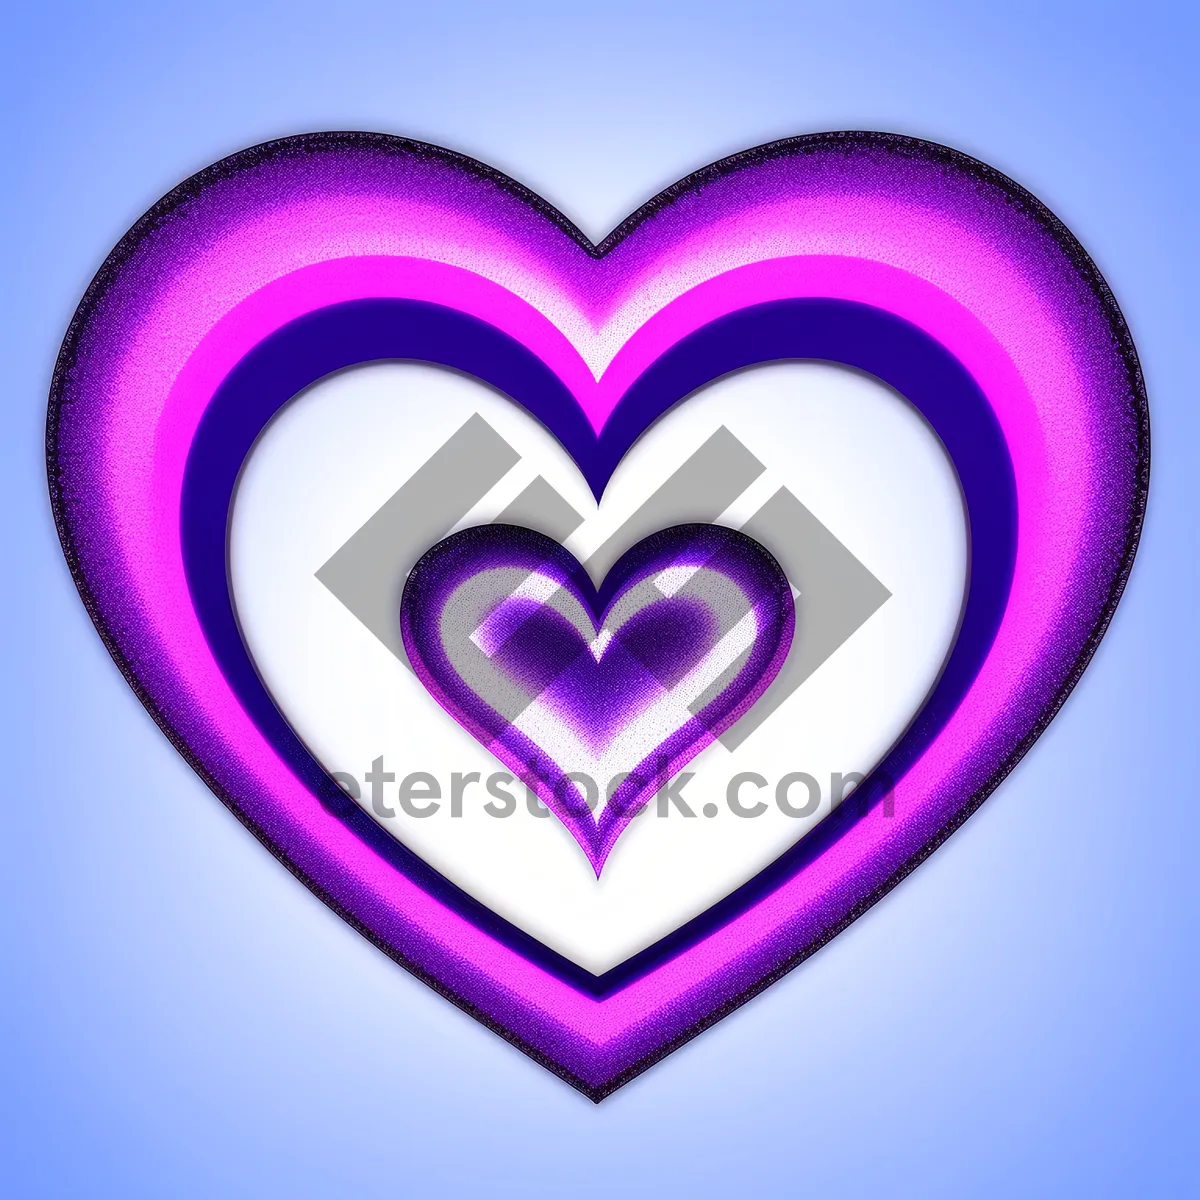 Picture of Mystic Love: Colorful Heart Fractal Design